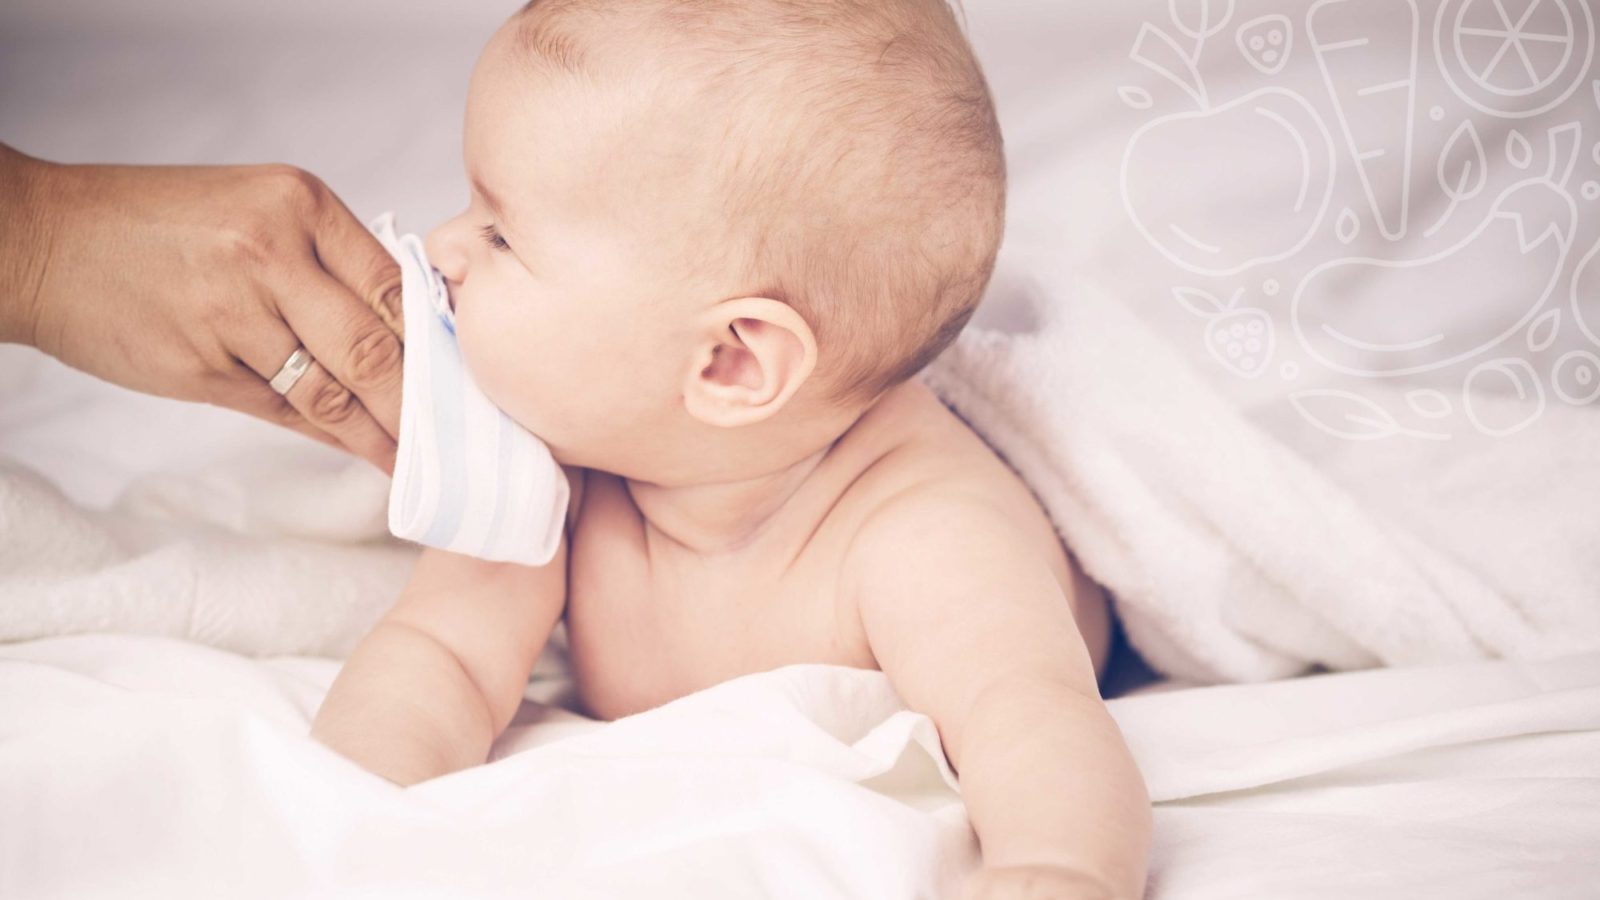 How to reduce your baby’s asthma & allergy risk